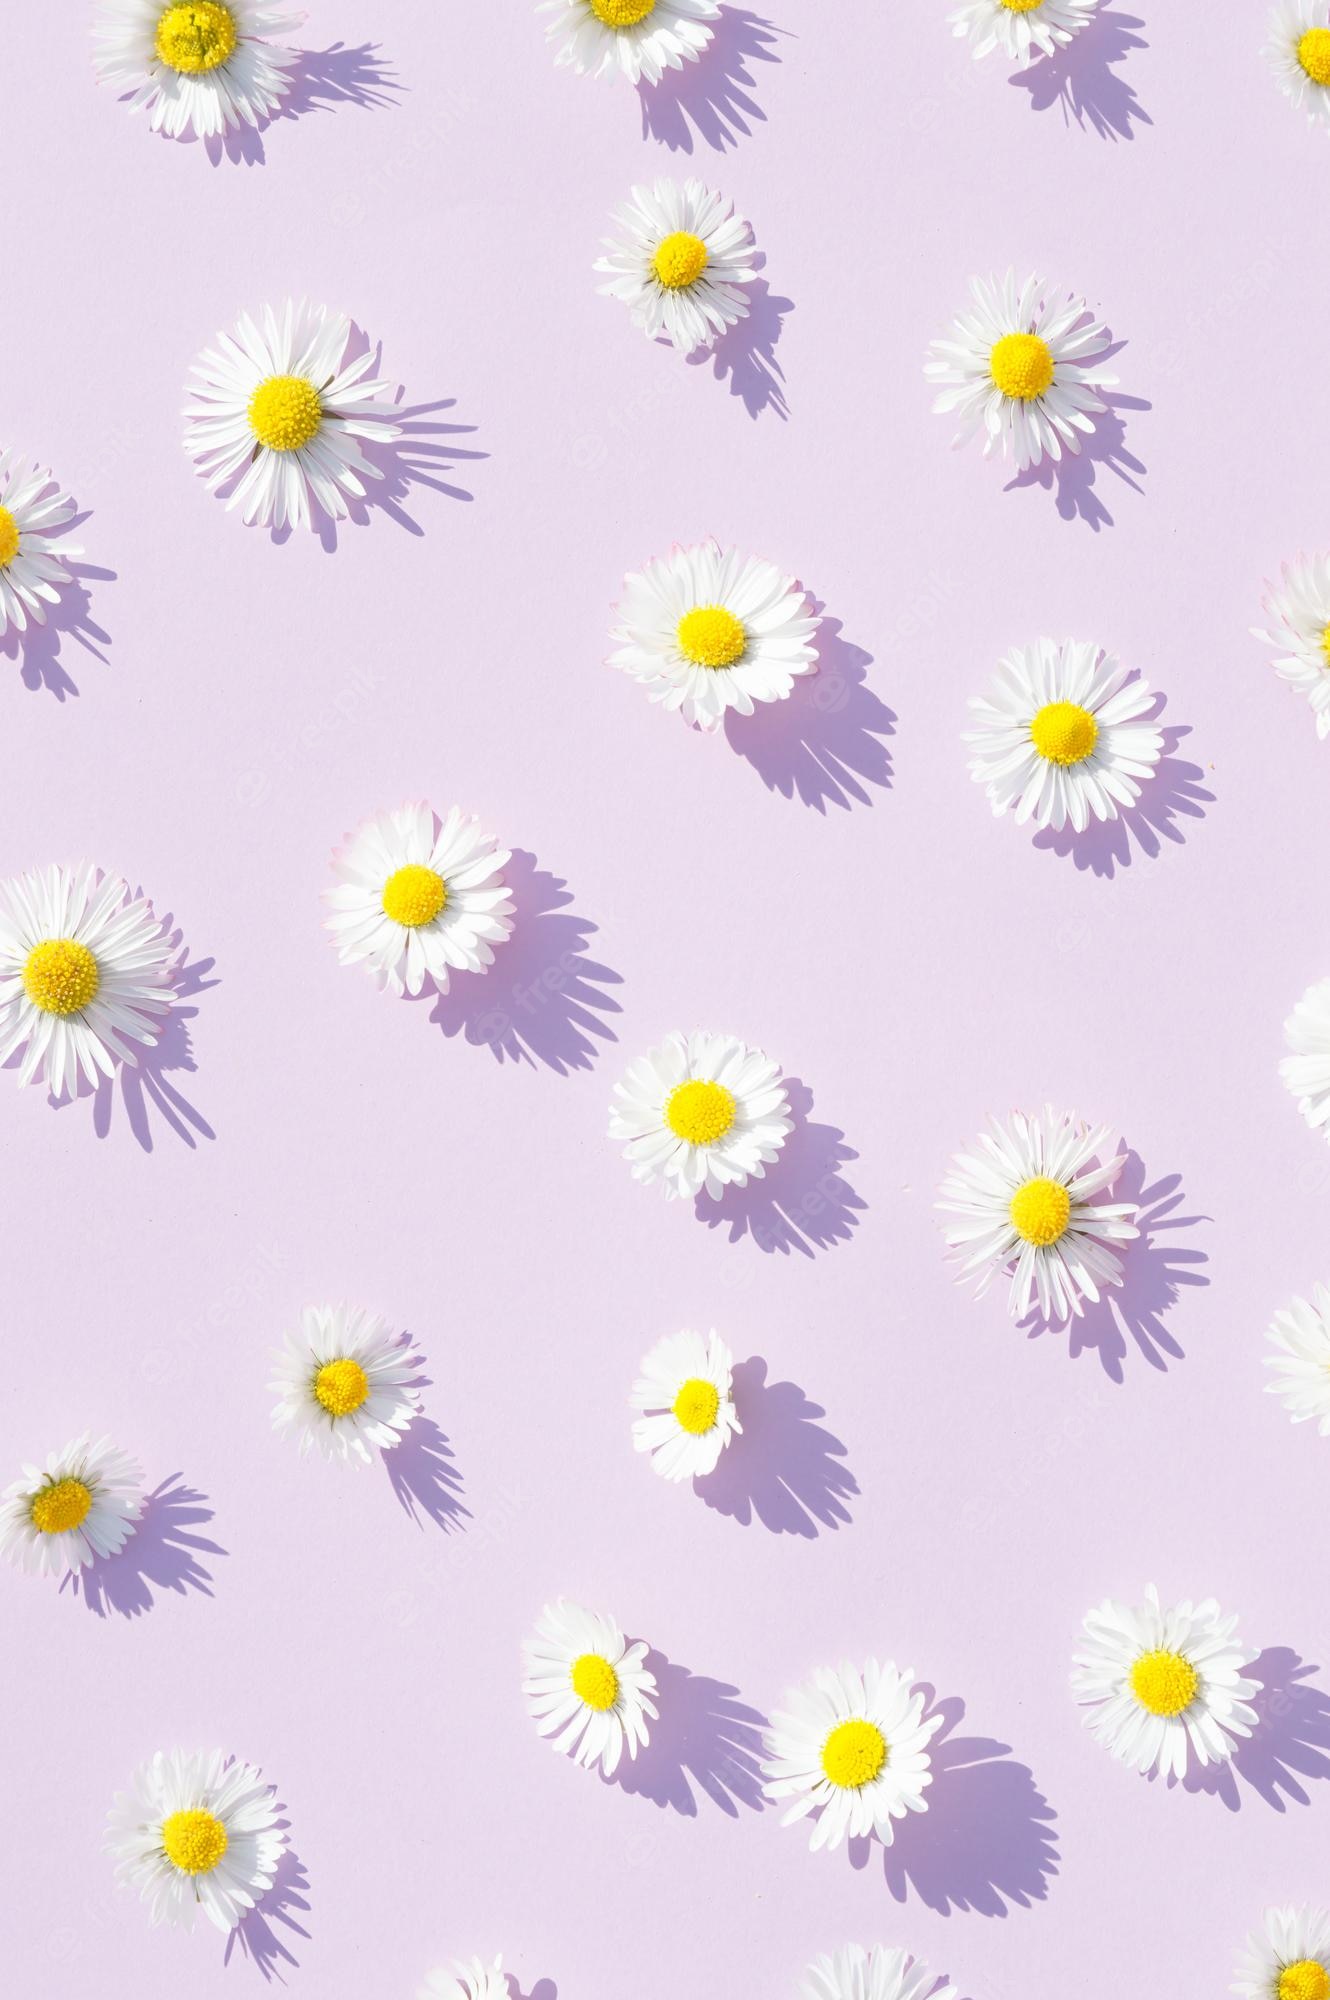 A close up of daisies on pink background - Daisy